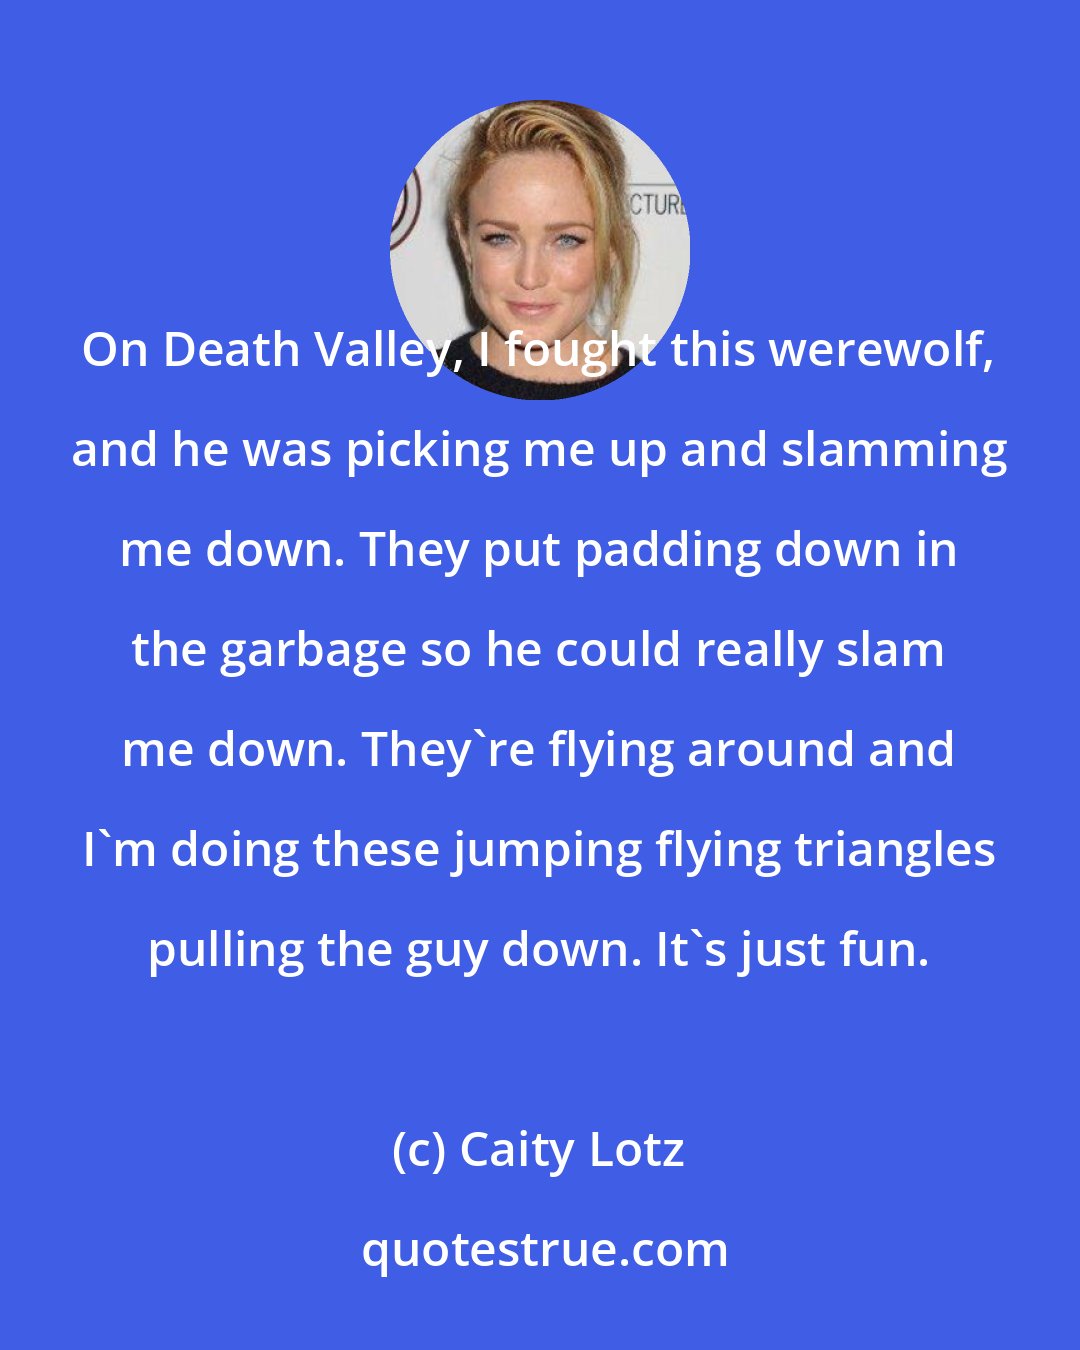 Caity Lotz: On Death Valley, I fought this werewolf, and he was picking me up and slamming me down. They put padding down in the garbage so he could really slam me down. They're flying around and I'm doing these jumping flying triangles pulling the guy down. It's just fun.